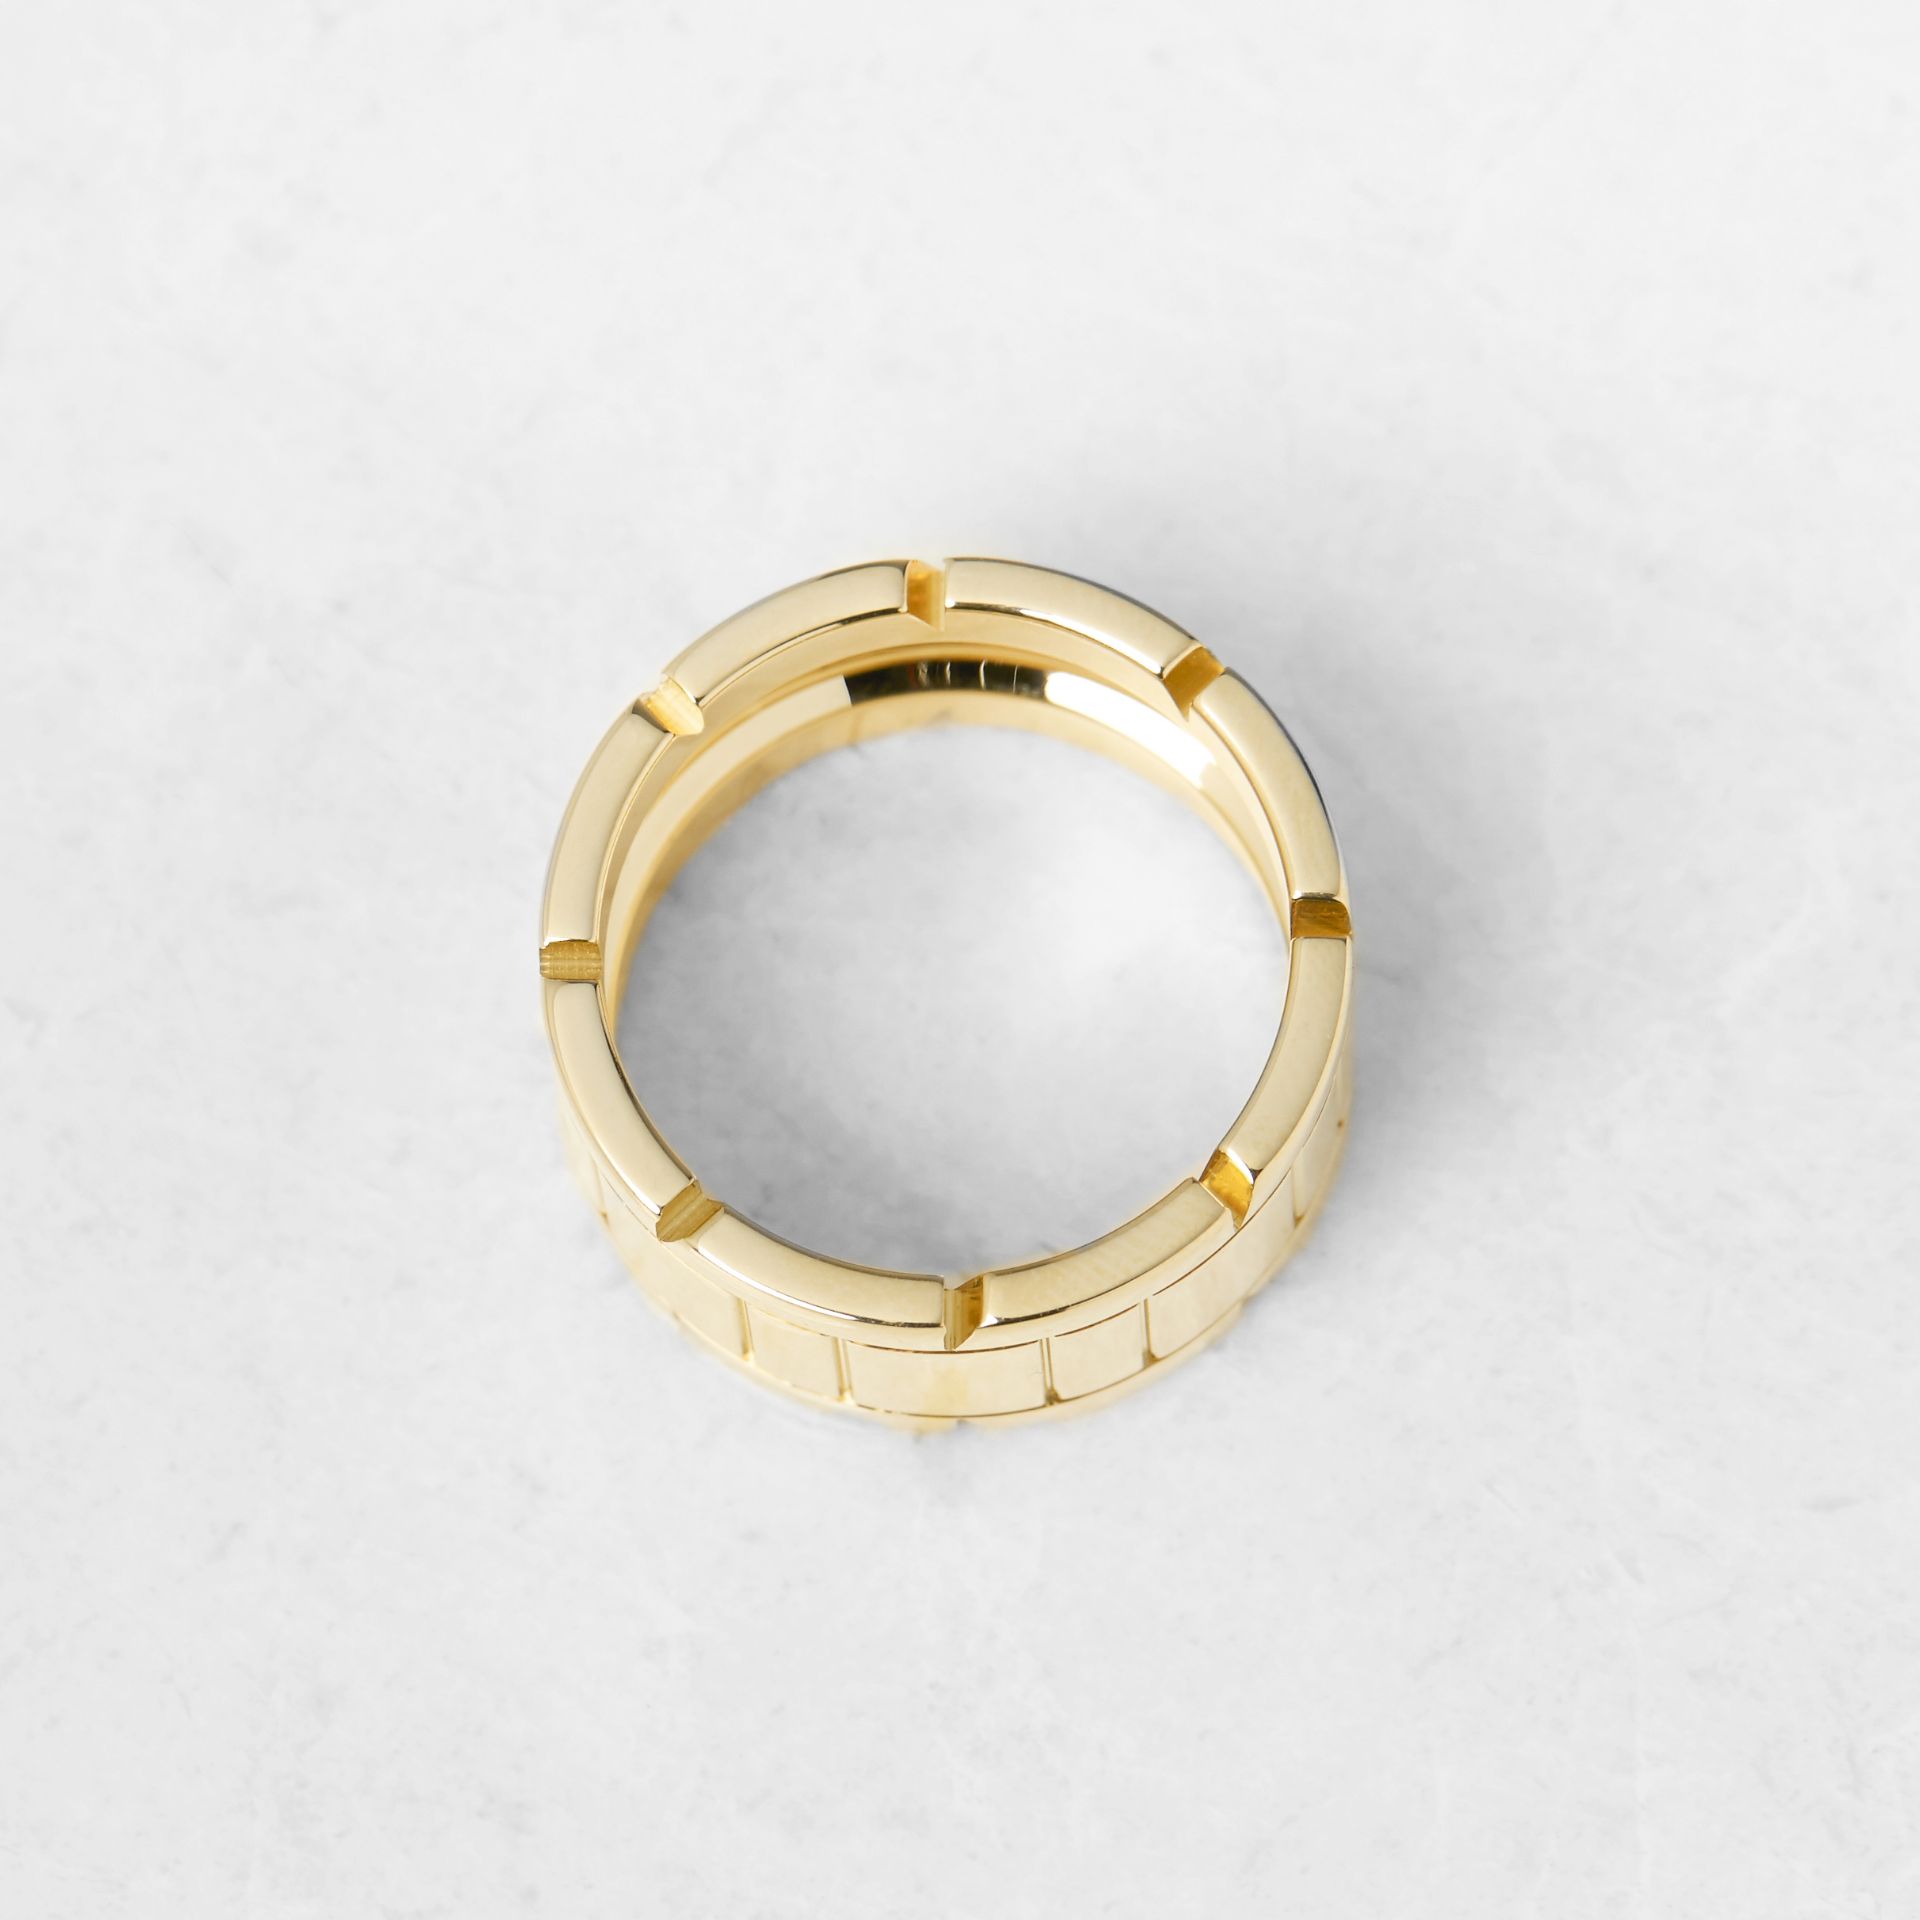 Cartier 18k Yellow Gold Tank Francaise Ring - Image 8 of 8